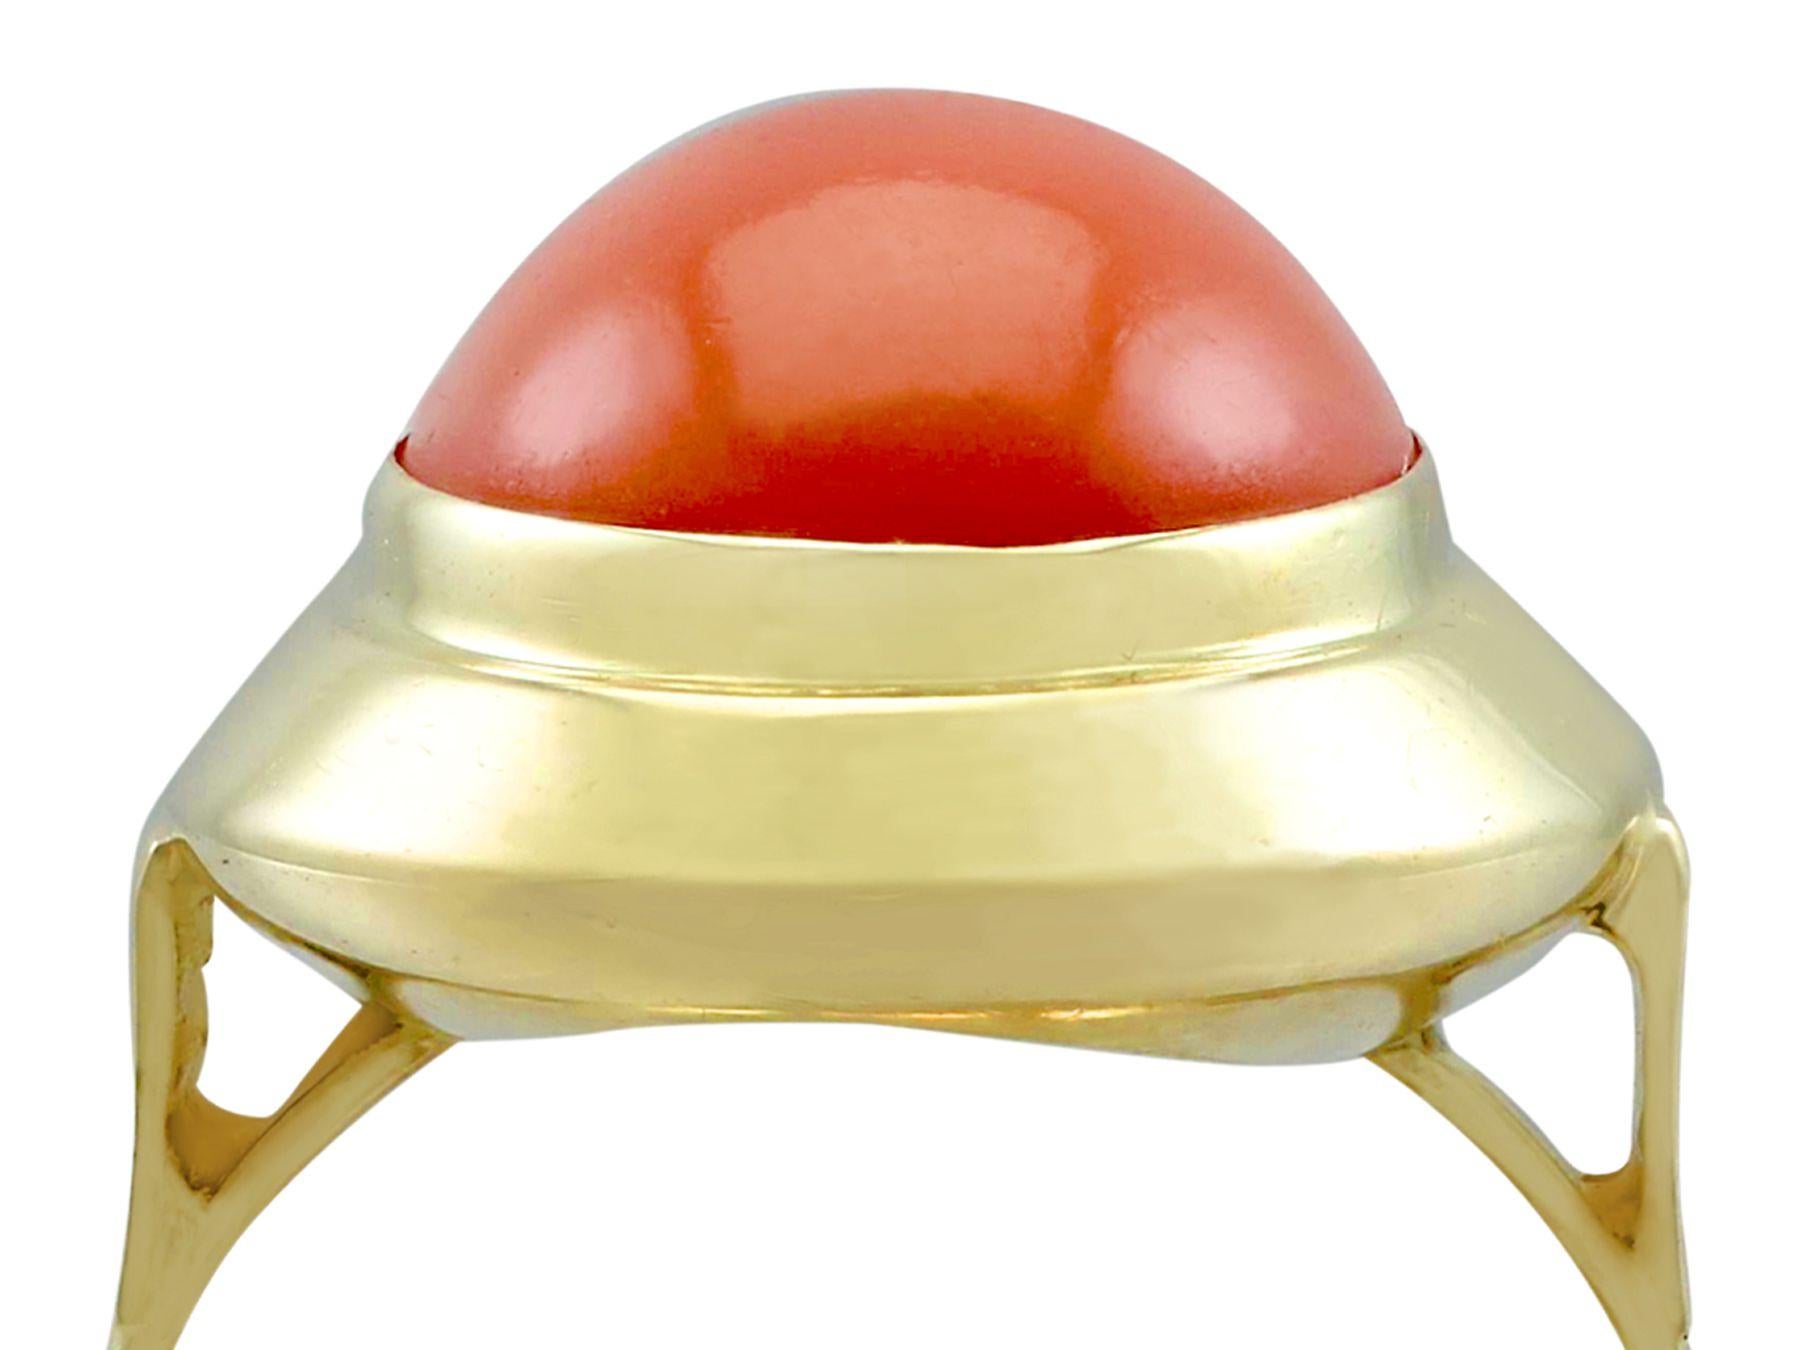 An impressive vintage 5.75 carat red coral and 14 karat yellow gold cocktail ring ring; part of our diverse gemstone jewelry and estate jewelry collections.

This impressive red cabochon cut coral ring has been crafted in 14k yellow gold.

The